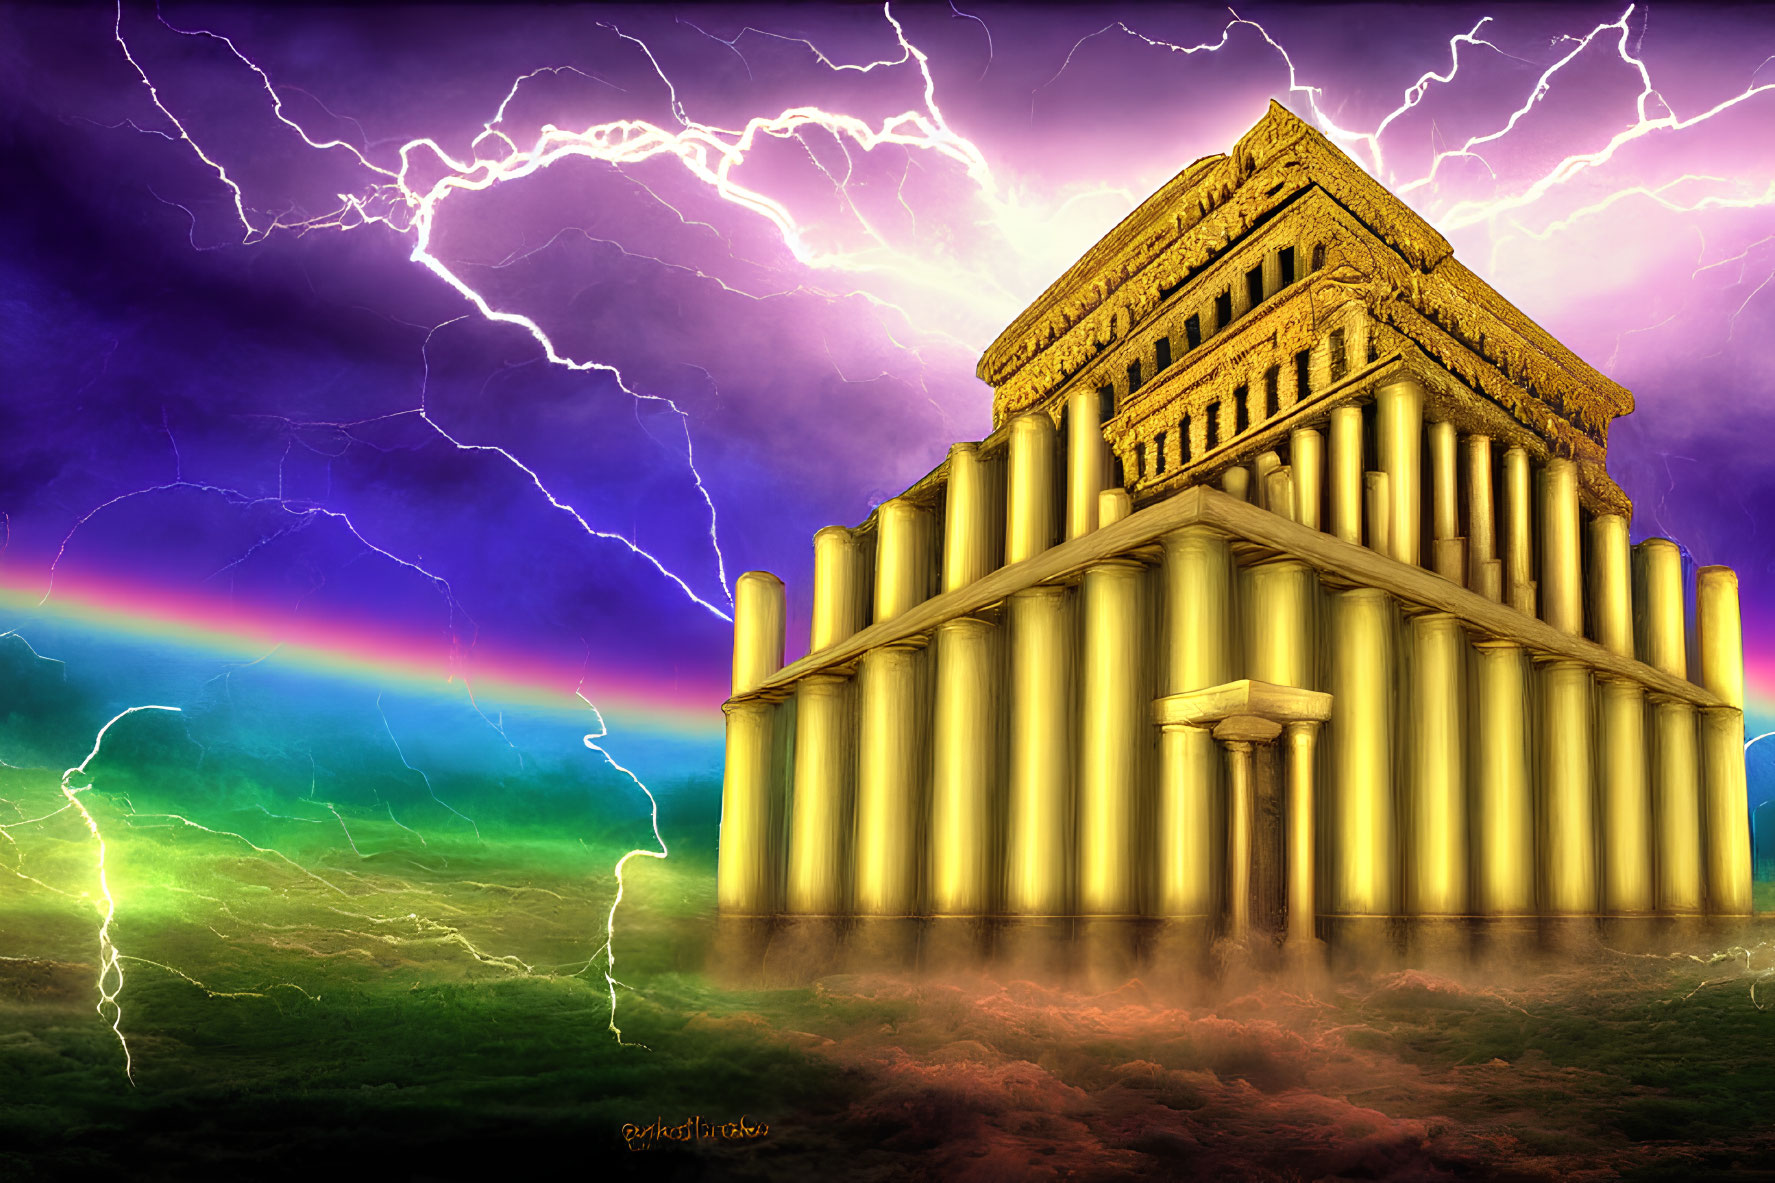 Ancient temple with towering columns under stormy sky and faint rainbow